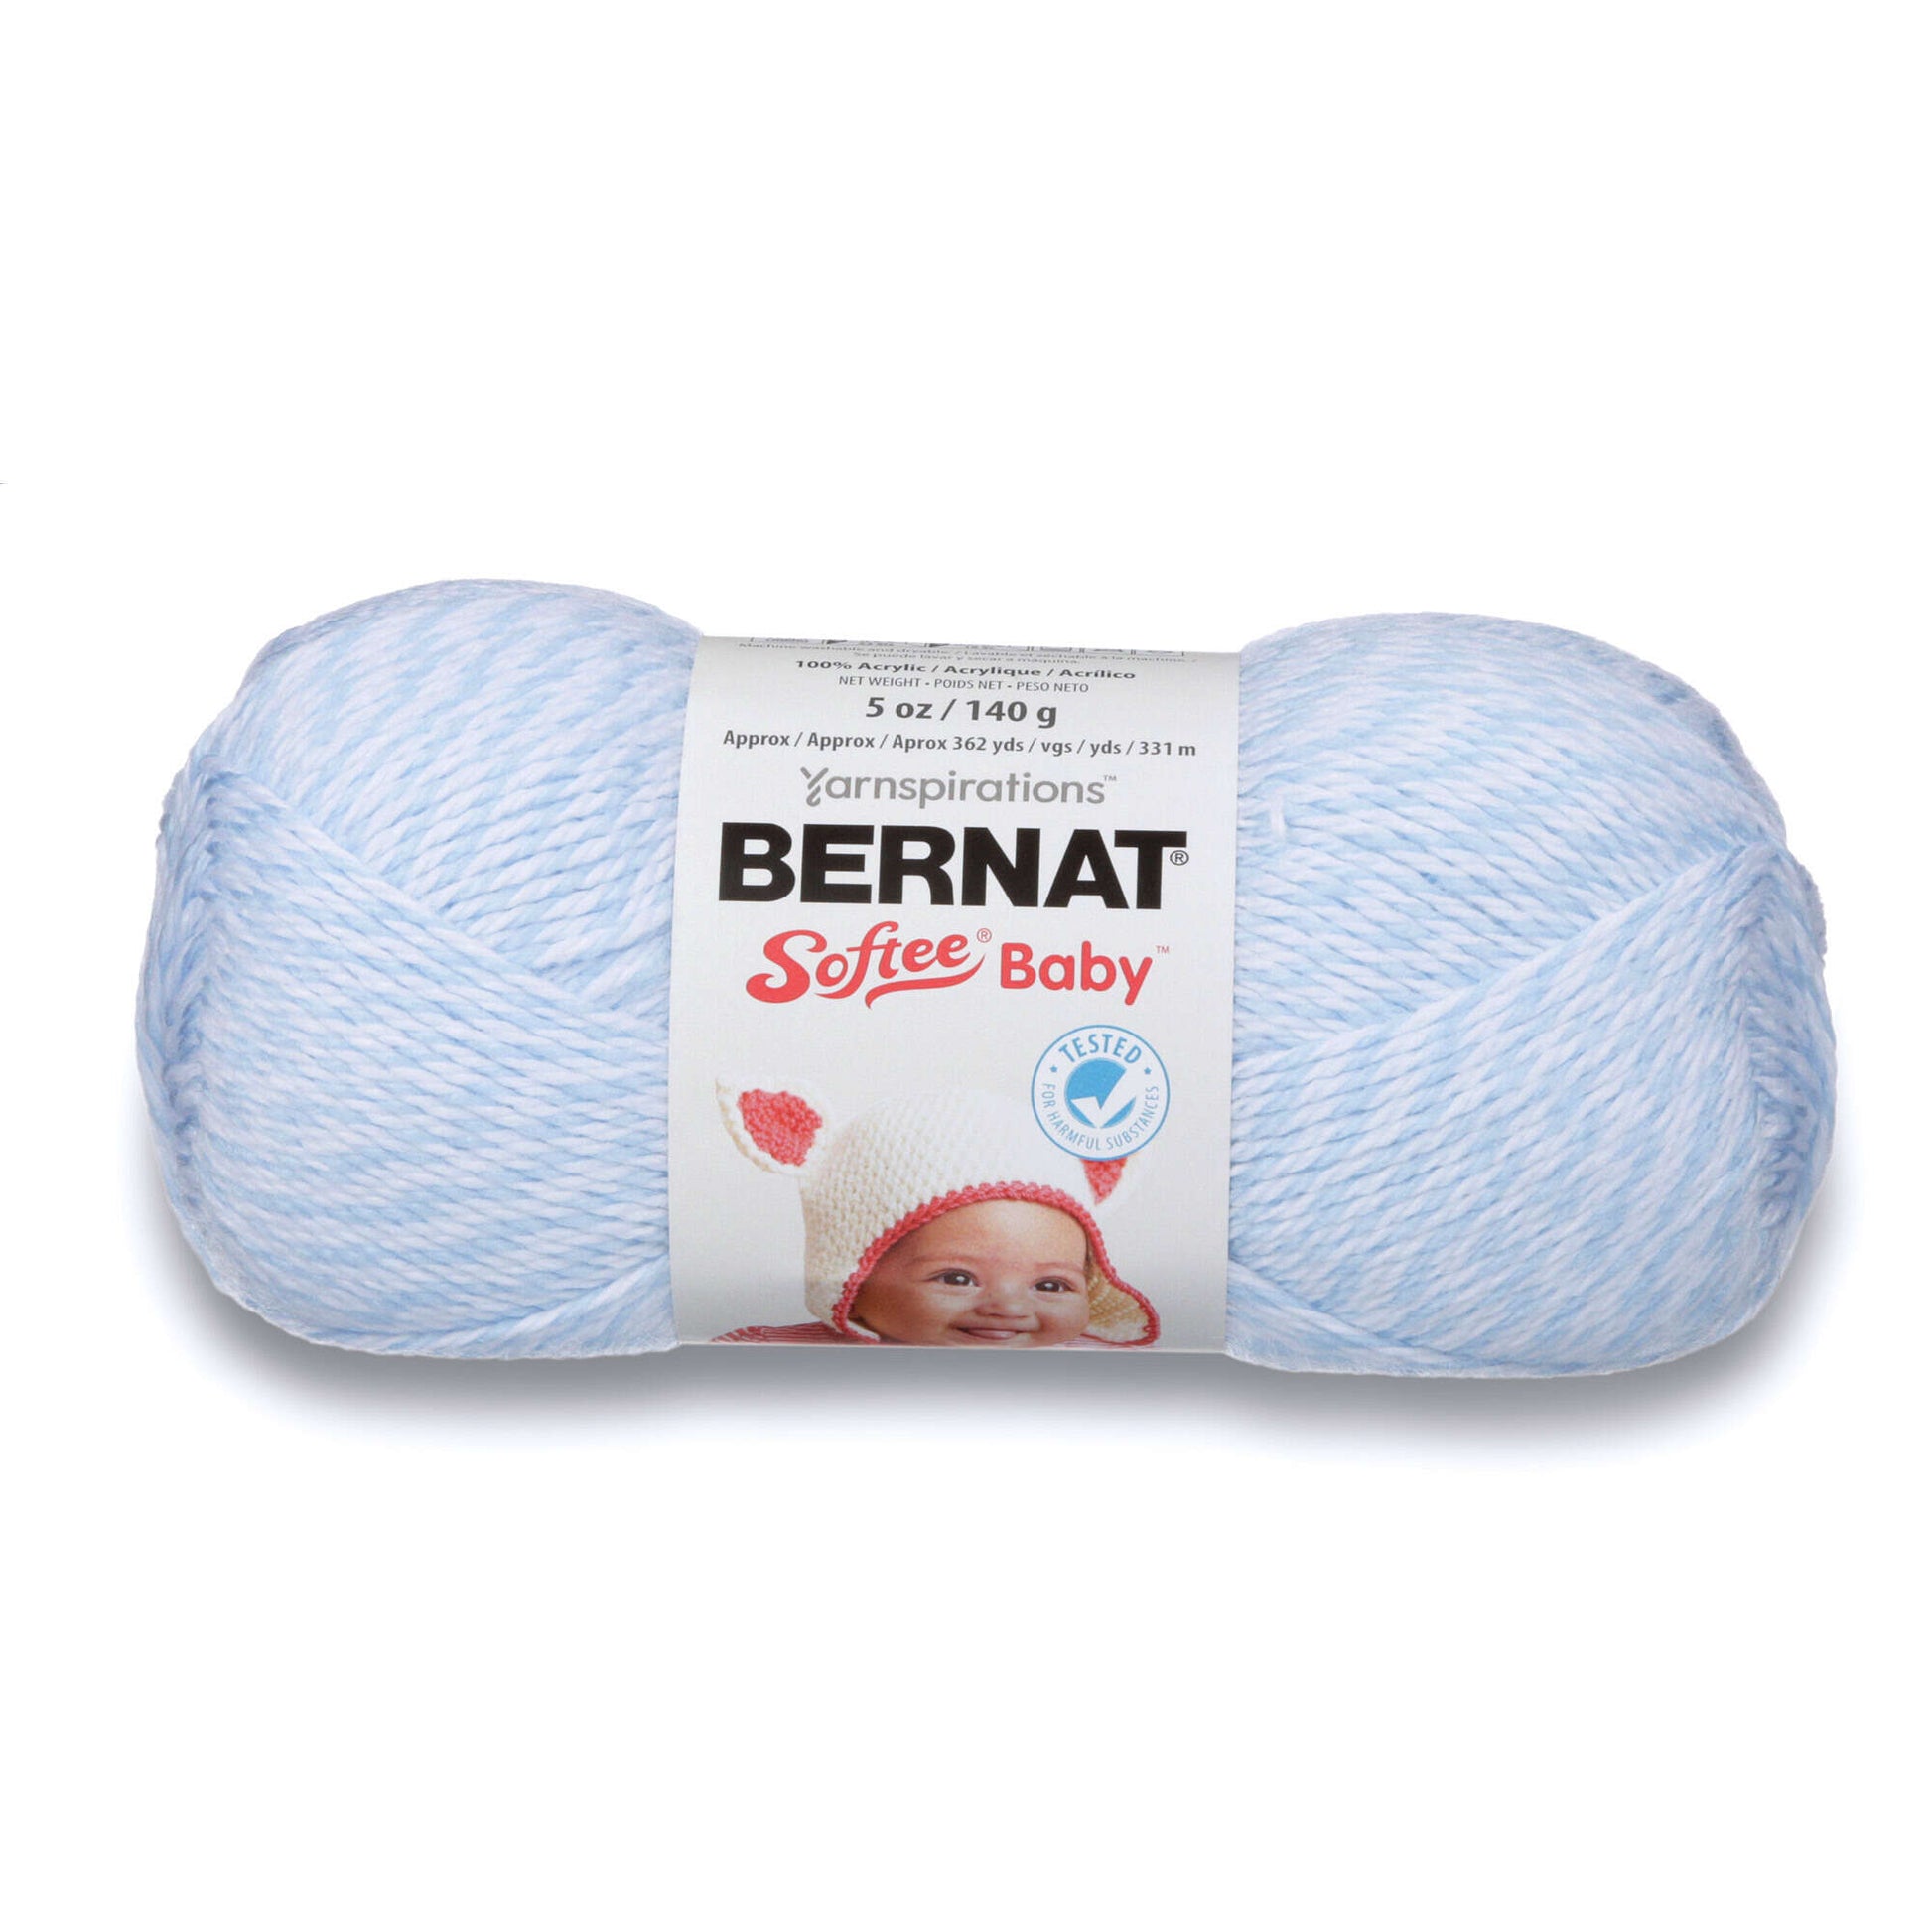 Baby Bee Adore A Ball in Baby's Blue, Light Blue Velvet Yarn, Baby